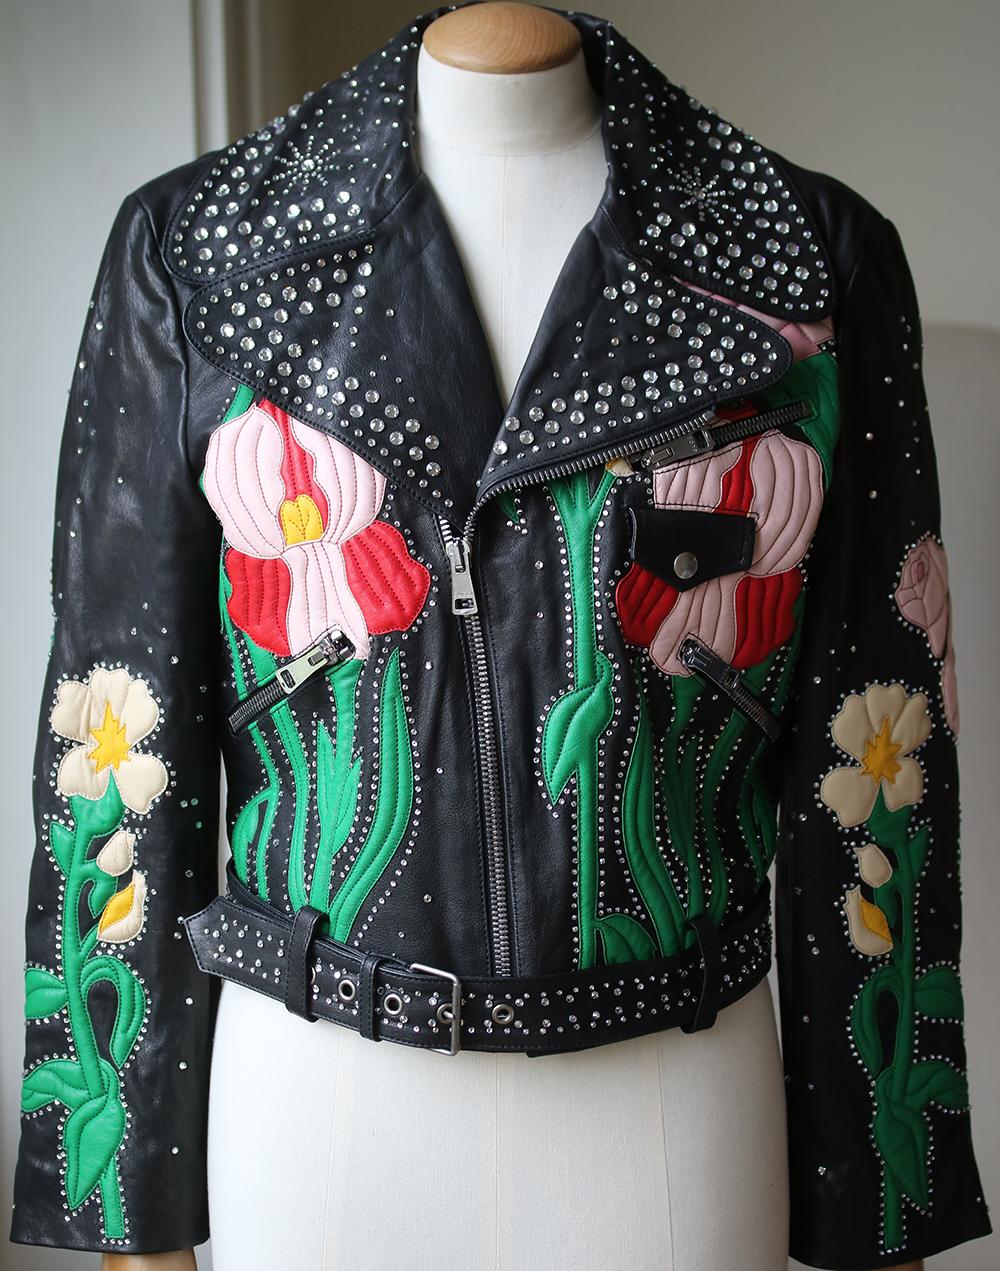 A couture-like collector's piece produced in limited numbers, Gucci's leather biker jacket has been hand-painted and hand-embroidered with leather flowers and crystal studs – each one is totally unique. Slim-fit design is lined in a lustrous red